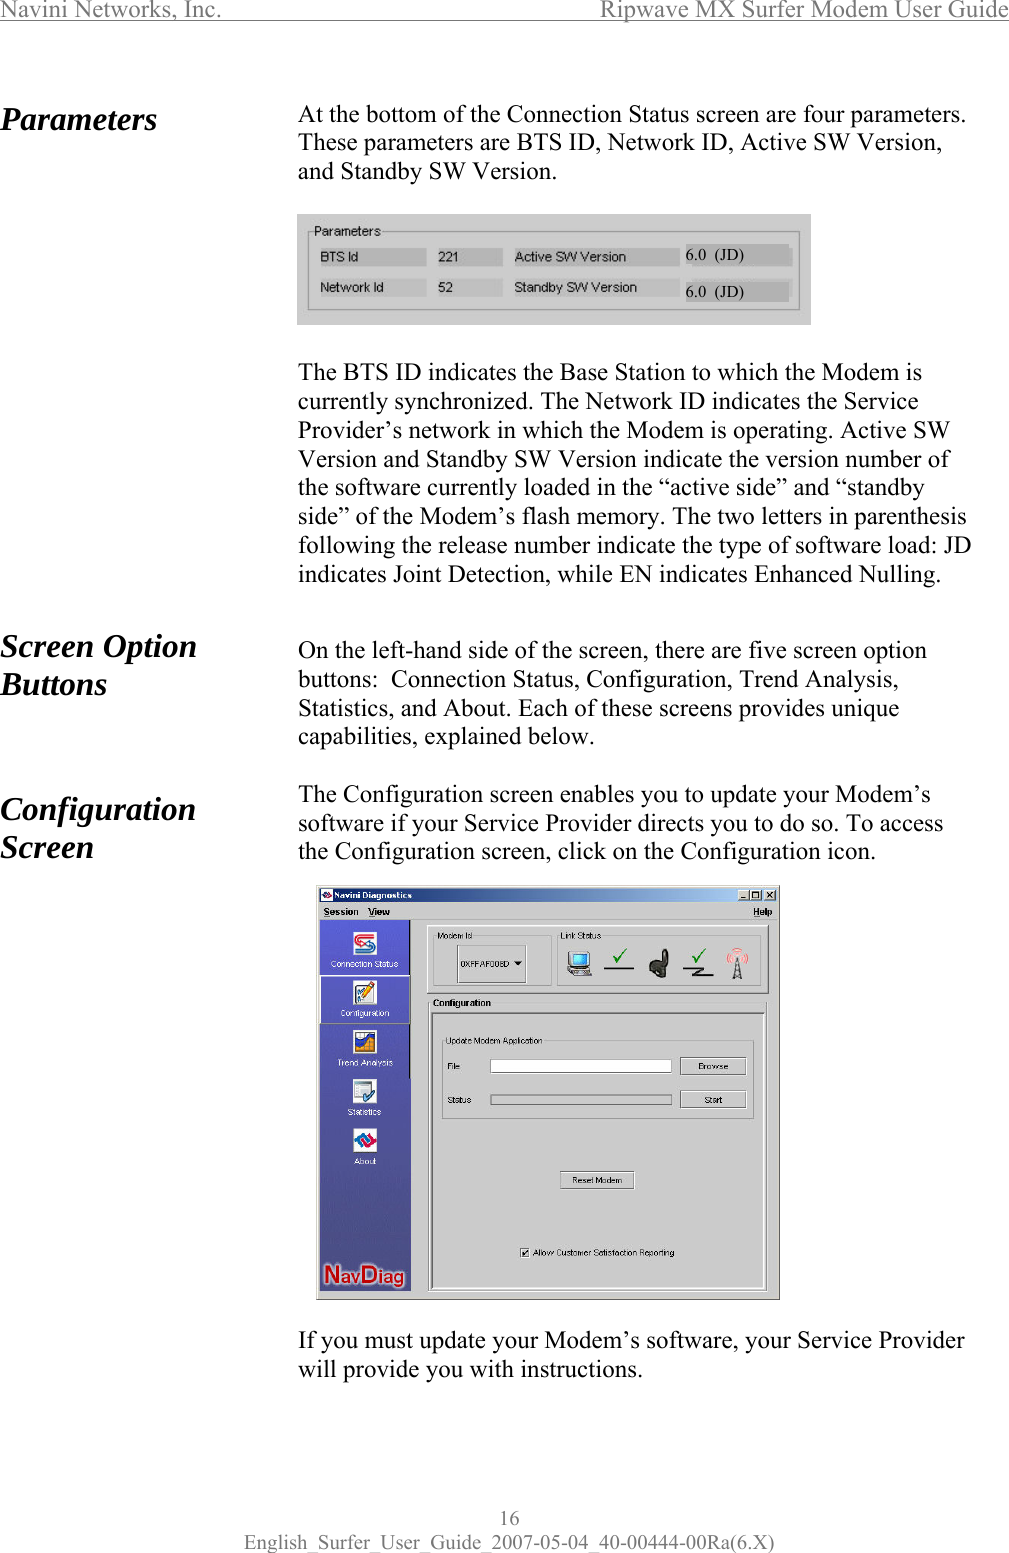 Navini Networks, Inc.      Ripwave MX Surfer Modem User Guide 16 English_Surfer_User_Guide_2007-05-04_40-00444-00Ra(6.X) Parameters                  Screen Option Buttons    Configuration Screen                    At the bottom of the Connection Status screen are four parameters. These parameters are BTS ID, Network ID, Active SW Version, and Standby SW Version.        The BTS ID indicates the Base Station to which the Modem is currently synchronized. The Network ID indicates the Service Provider’s network in which the Modem is operating. Active SW Version and Standby SW Version indicate the version number of the software currently loaded in the “active side” and “standby side” of the Modem’s flash memory. The two letters in parenthesis following the release number indicate the type of software load: JD indicates Joint Detection, while EN indicates Enhanced Nulling.   On the left-hand side of the screen, there are five screen option buttons:  Connection Status, Configuration, Trend Analysis, Statistics, and About. Each of these screens provides unique capabilities, explained below.  The Configuration screen enables you to update your Modem’s software if your Service Provider directs you to do so. To access the Configuration screen, click on the Configuration icon.                 If you must update your Modem’s software, your Service Provider will provide you with instructions.  6.0  (JD)6.0  (JD)6.0  (JD)6.0  (JD)